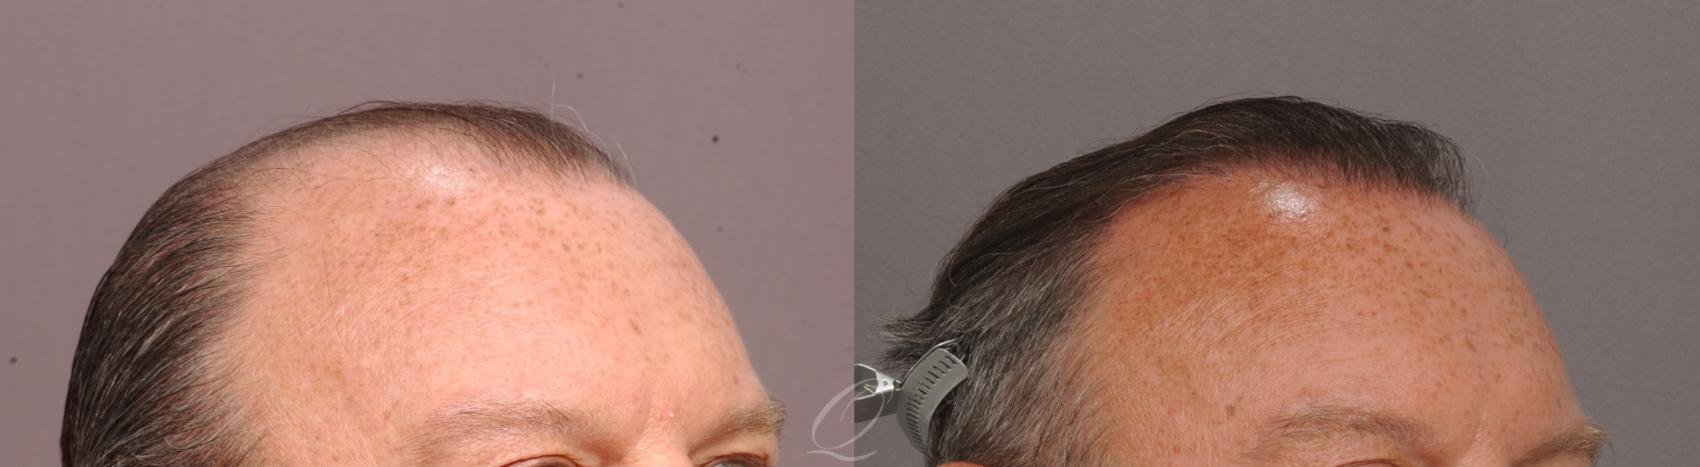 FUT Case 1001515 Before & After Right Oblique | Rochester, Buffalo, & Syracuse, NY | Quatela Center for Hair Restoration